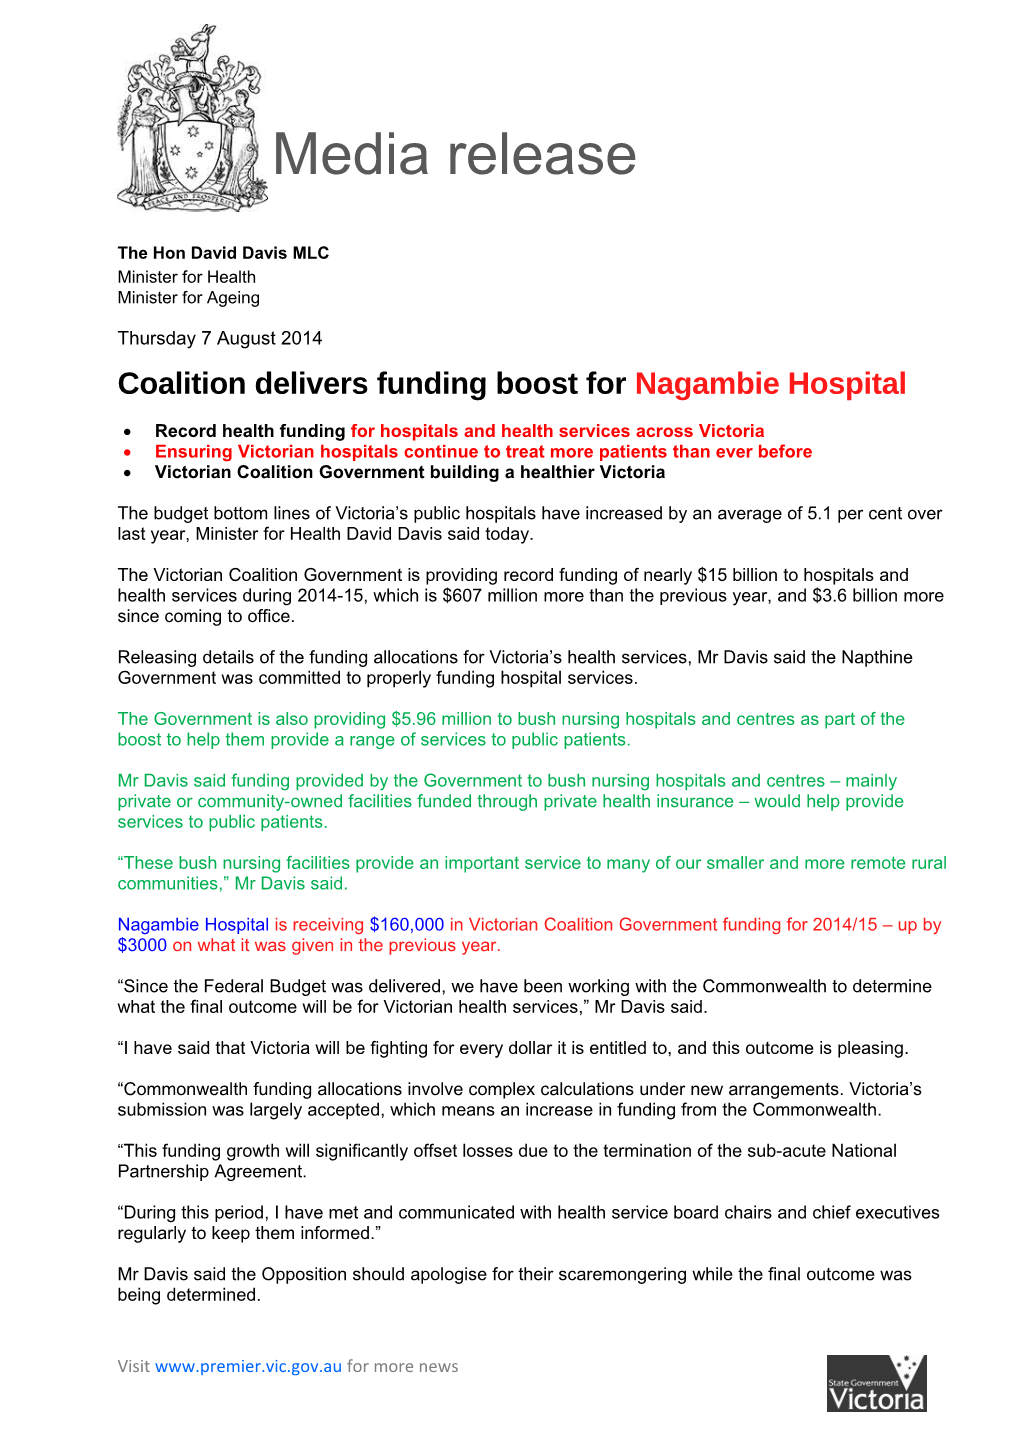 Coalition Delivers Funding Boost for Nagambie Hospital